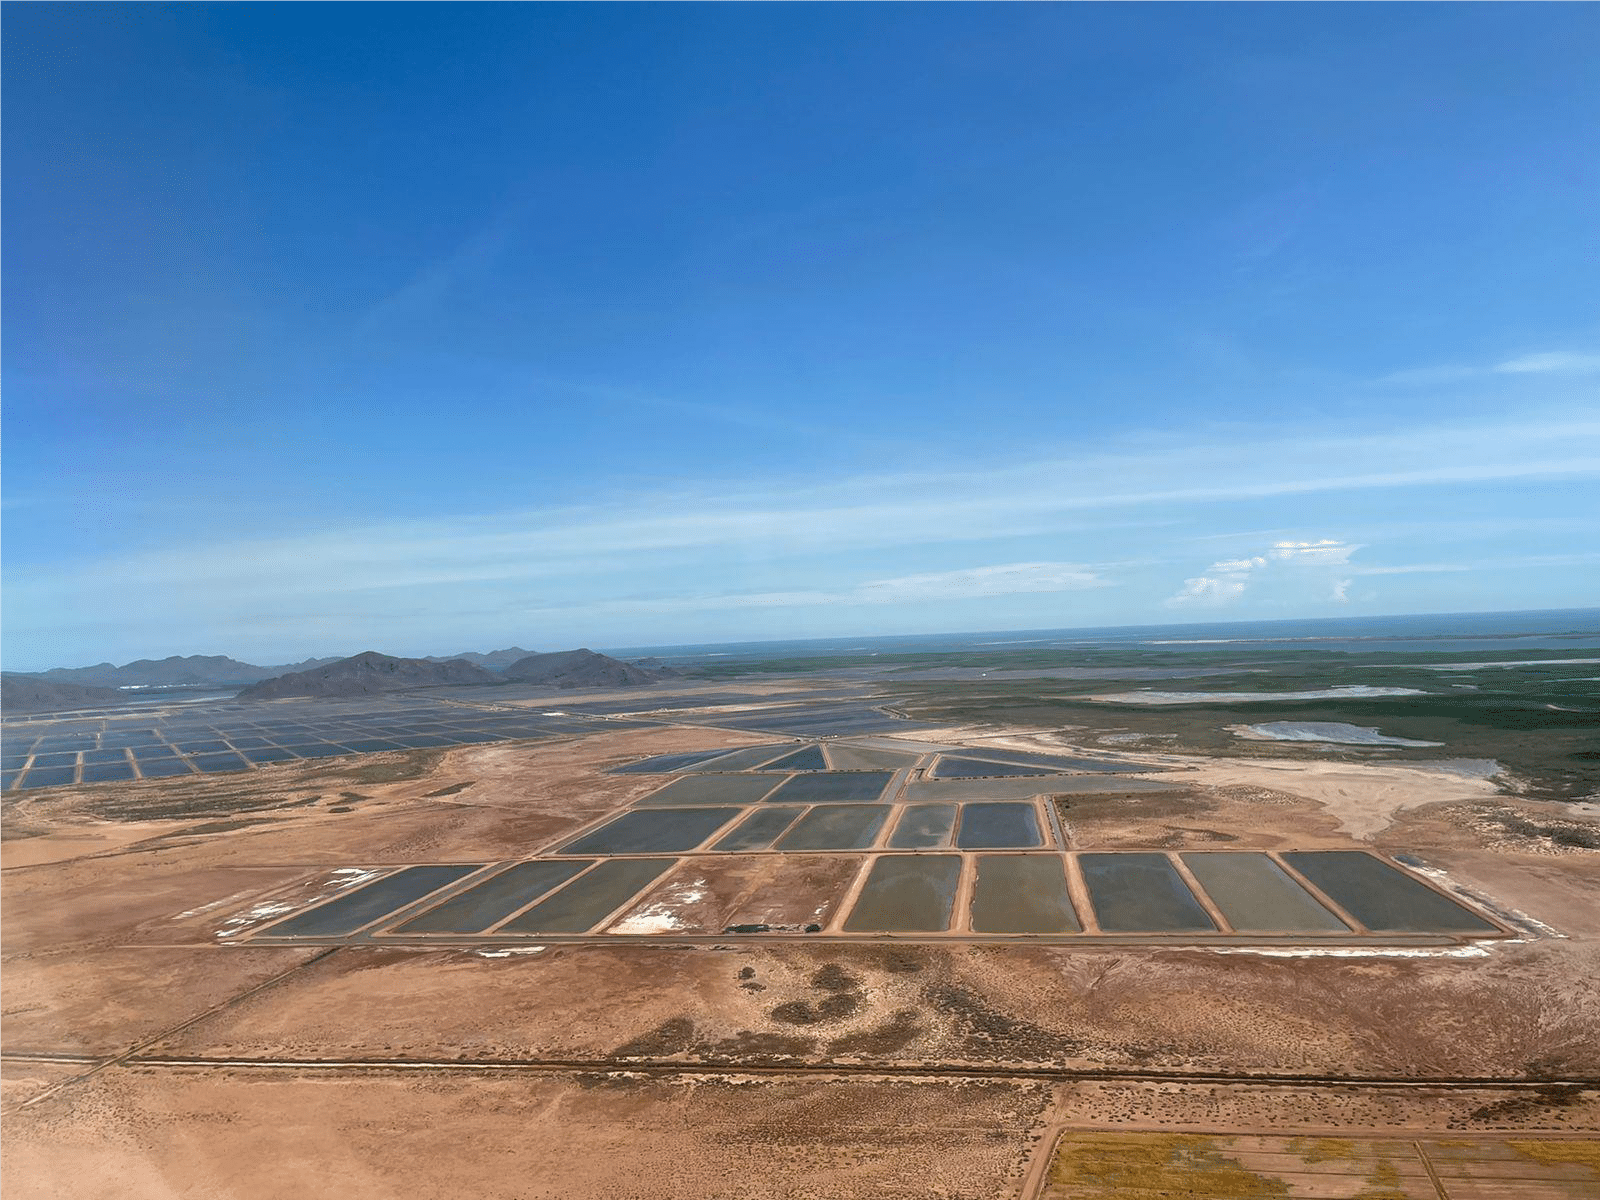 Shrimp farms were easily seen from above, before landing in Los Mochis.